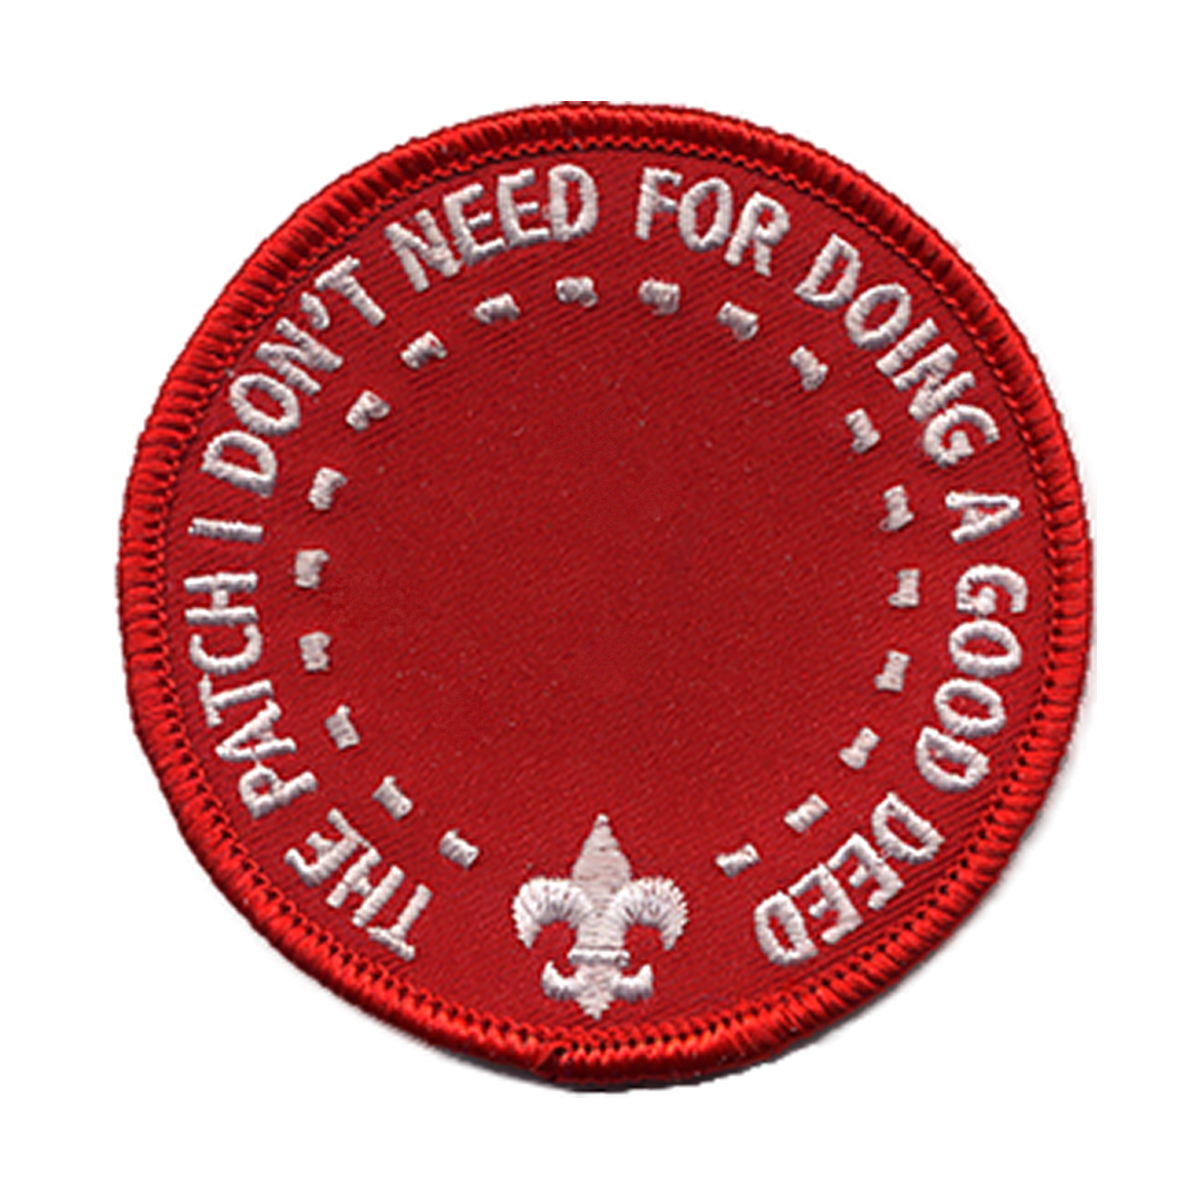 The Patch I Don't Need for Doing a Good Deed (Front)